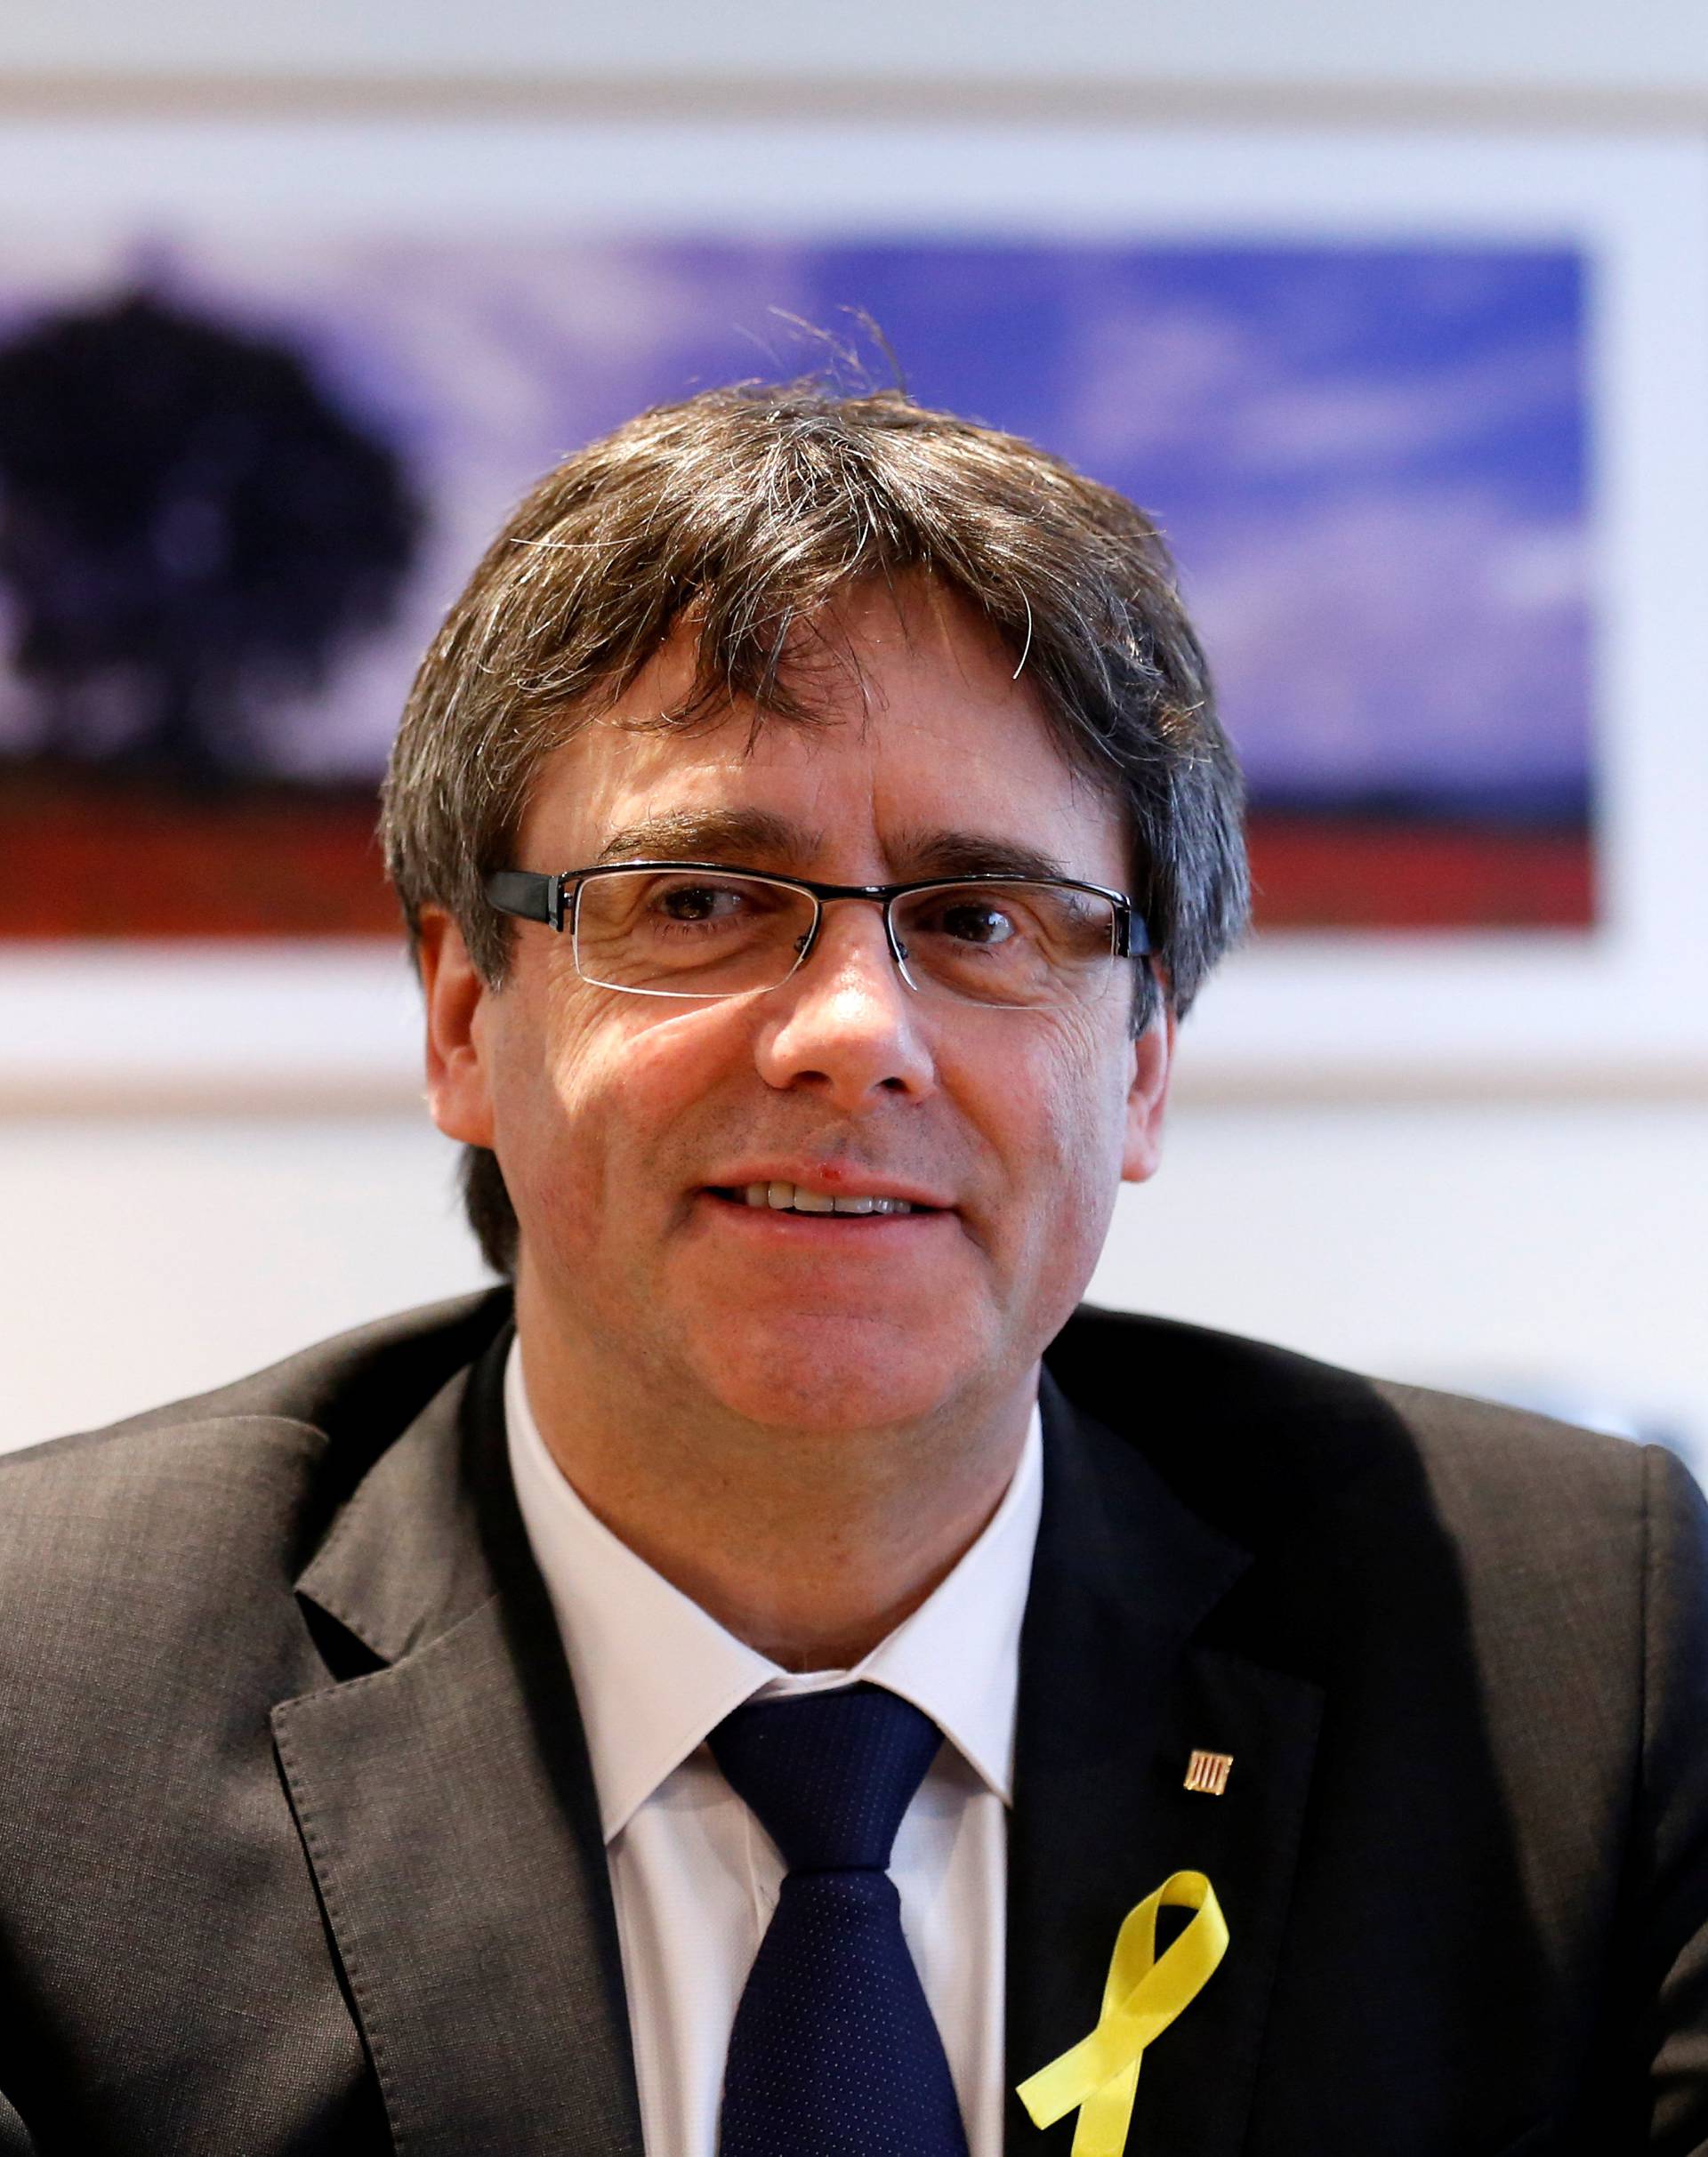 Former Catalan leader Puigdemont attends a meeting with his party 'Junts per Catalunya' parliament group in Brussels